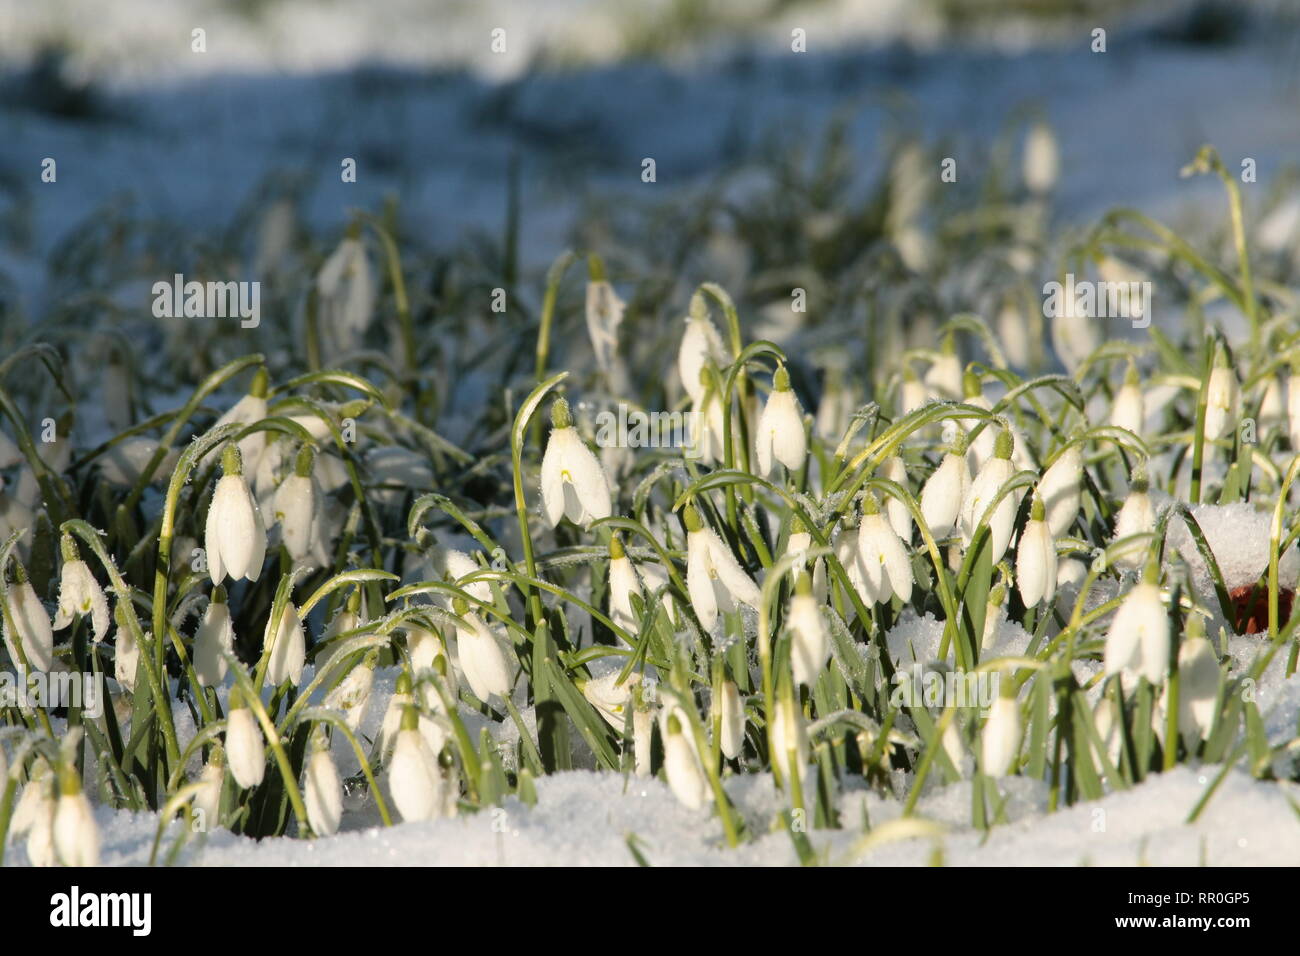 Snowdrops growing in snowy grass viewed from eye level in a landscape format Stock Photo